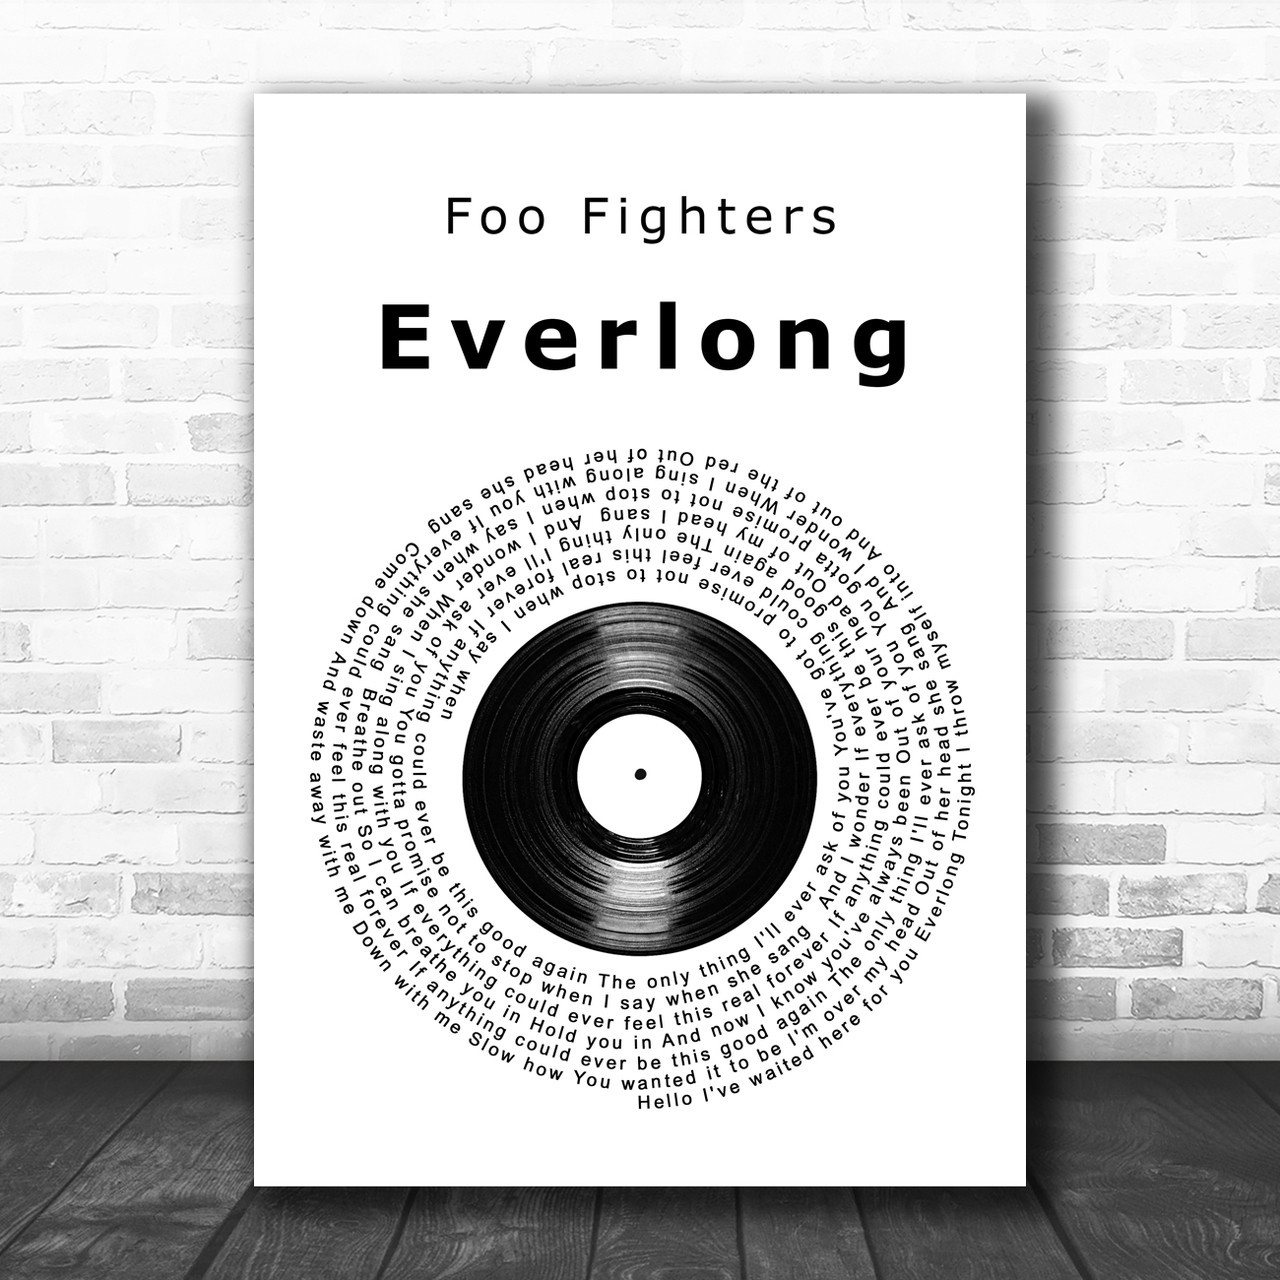 Foo Fighters - Everlong Song Lyrics Poster Painting Print on